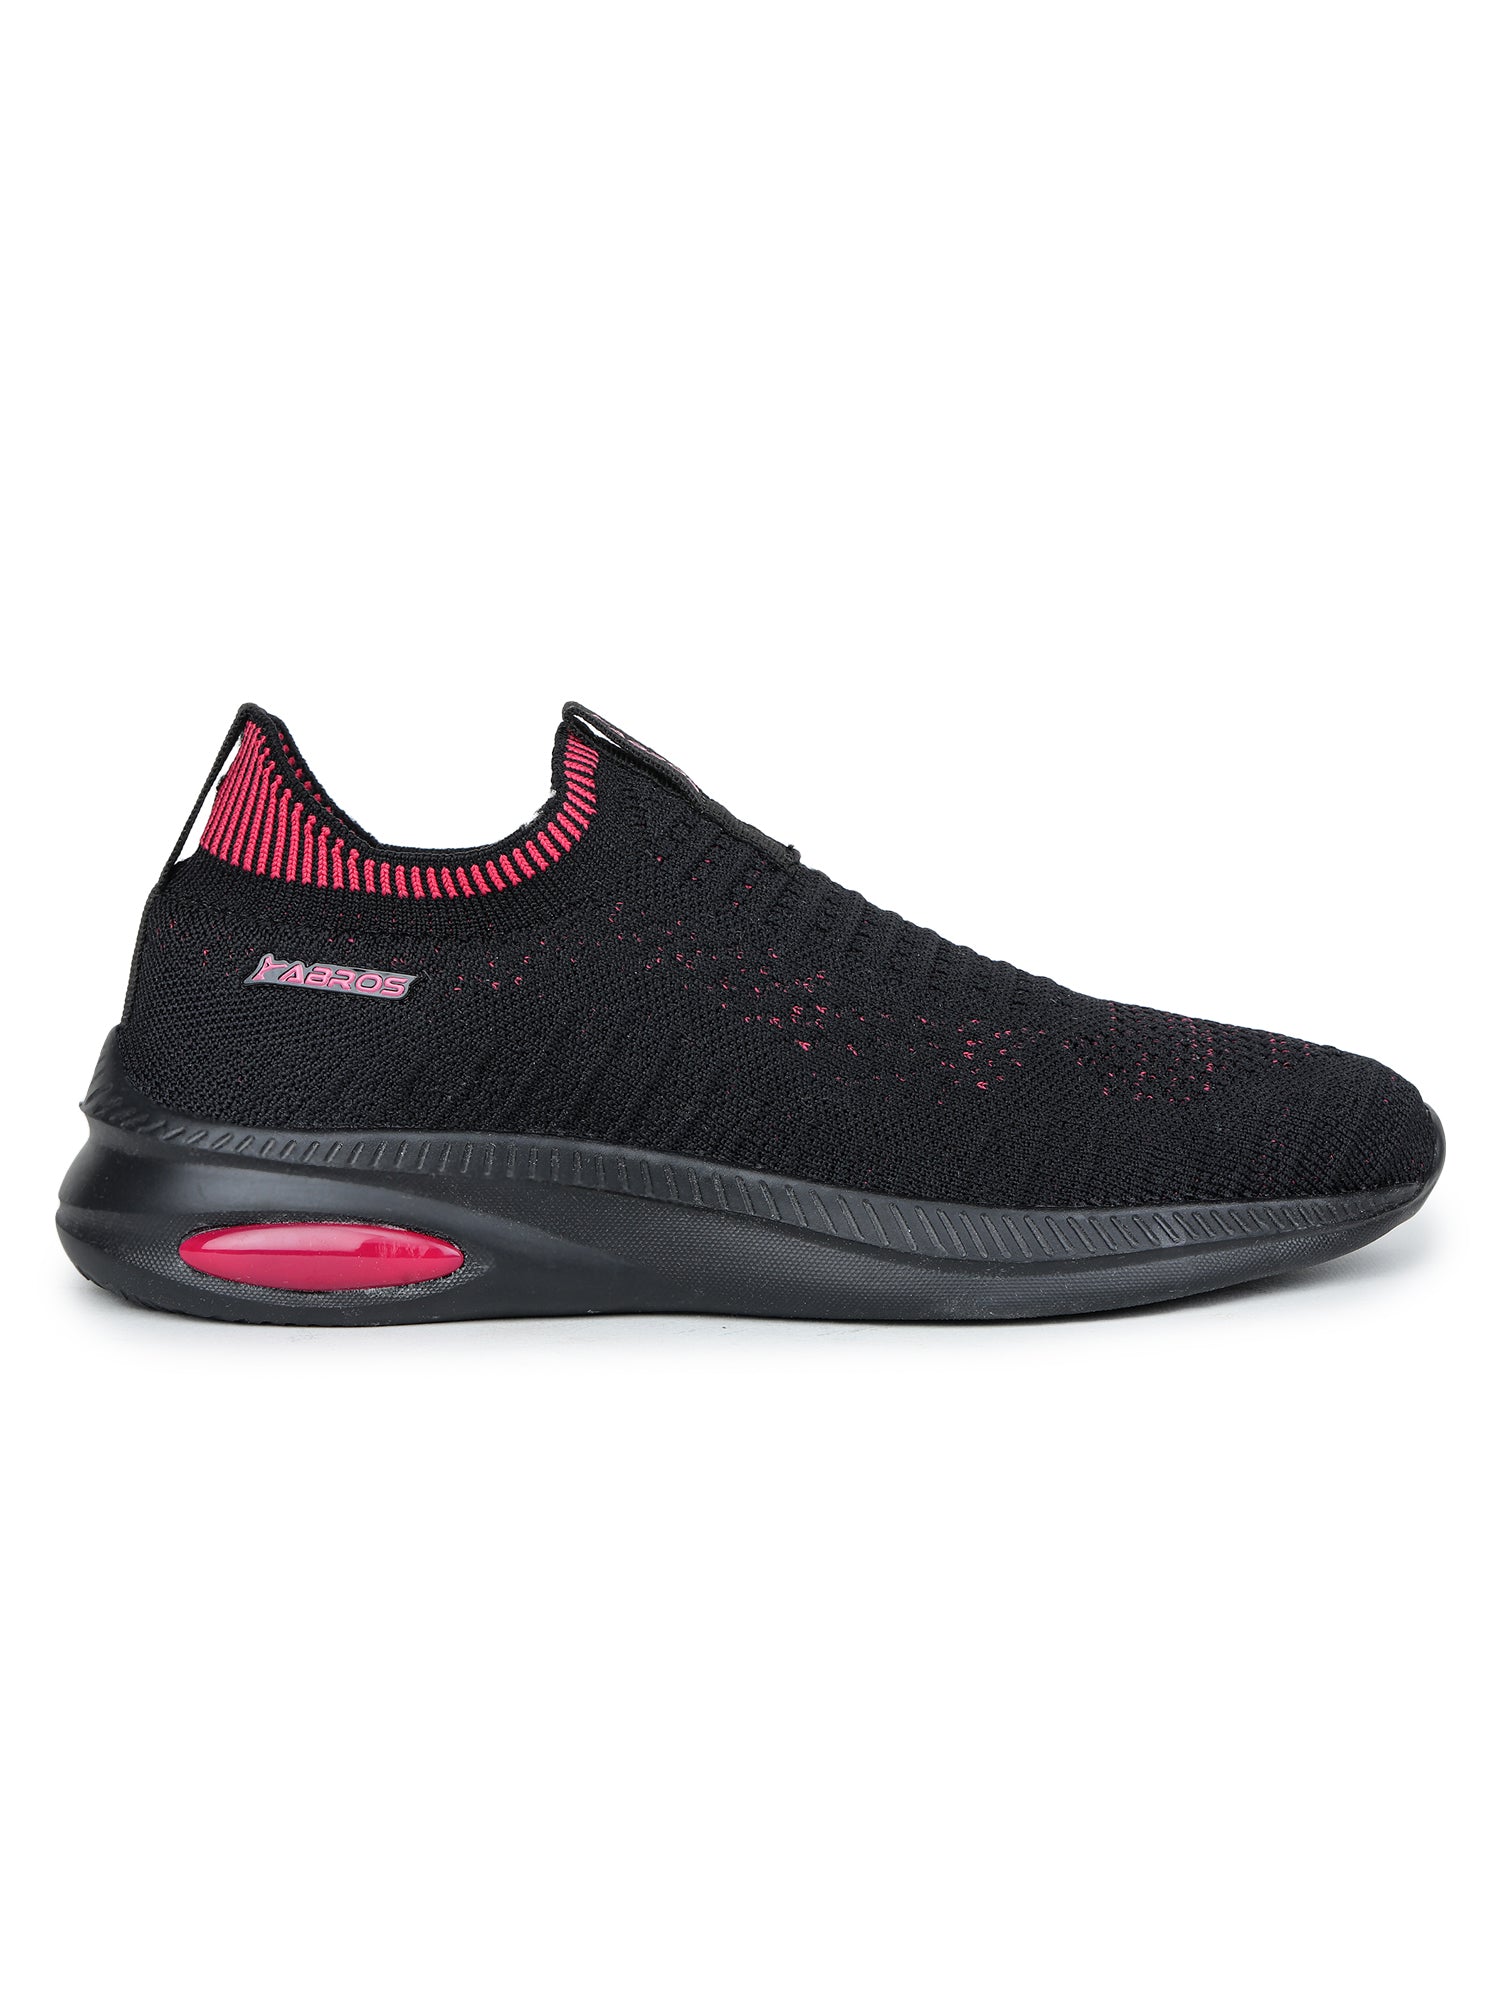 HARMONY SPORTS SHOES FOR WOMEN